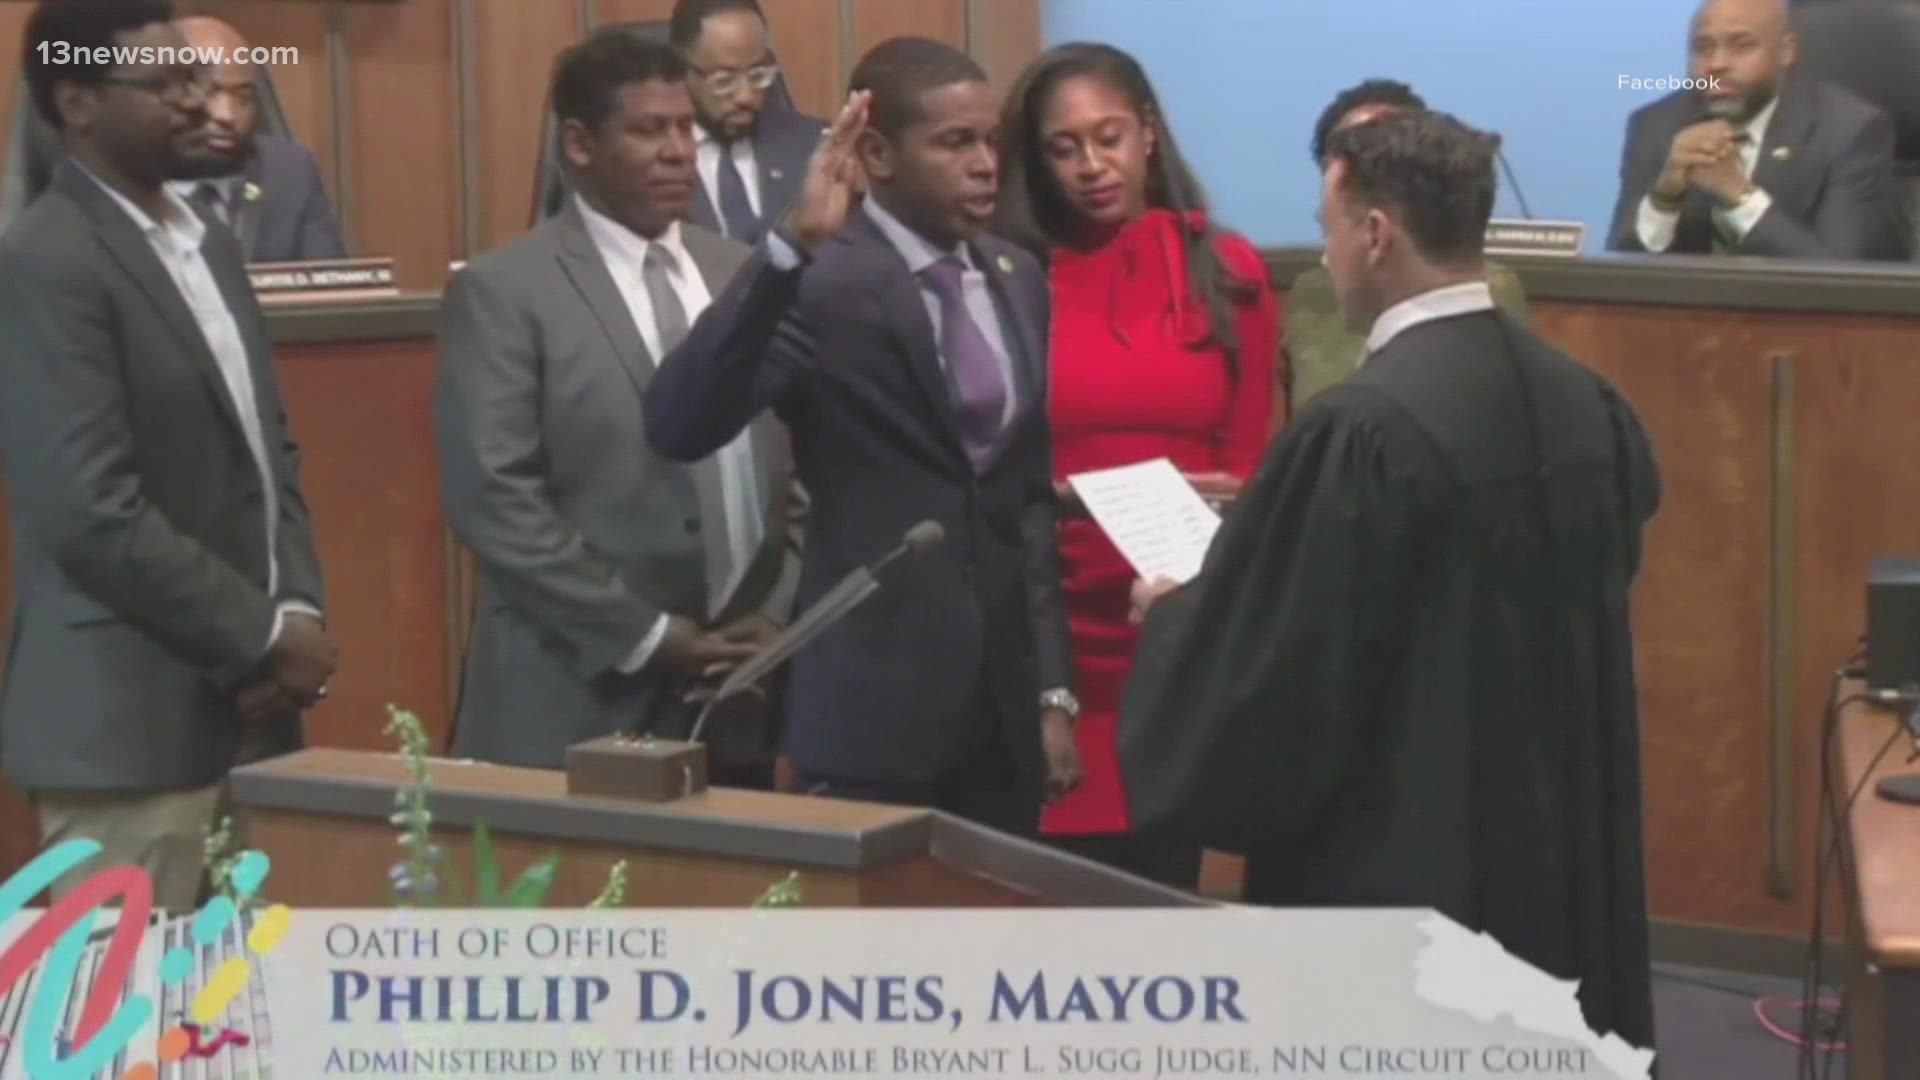 Phillip Jones is the city's youngest elected mayor. He's served in many leadership roles over the past decade and is a former Marine Corps officer.